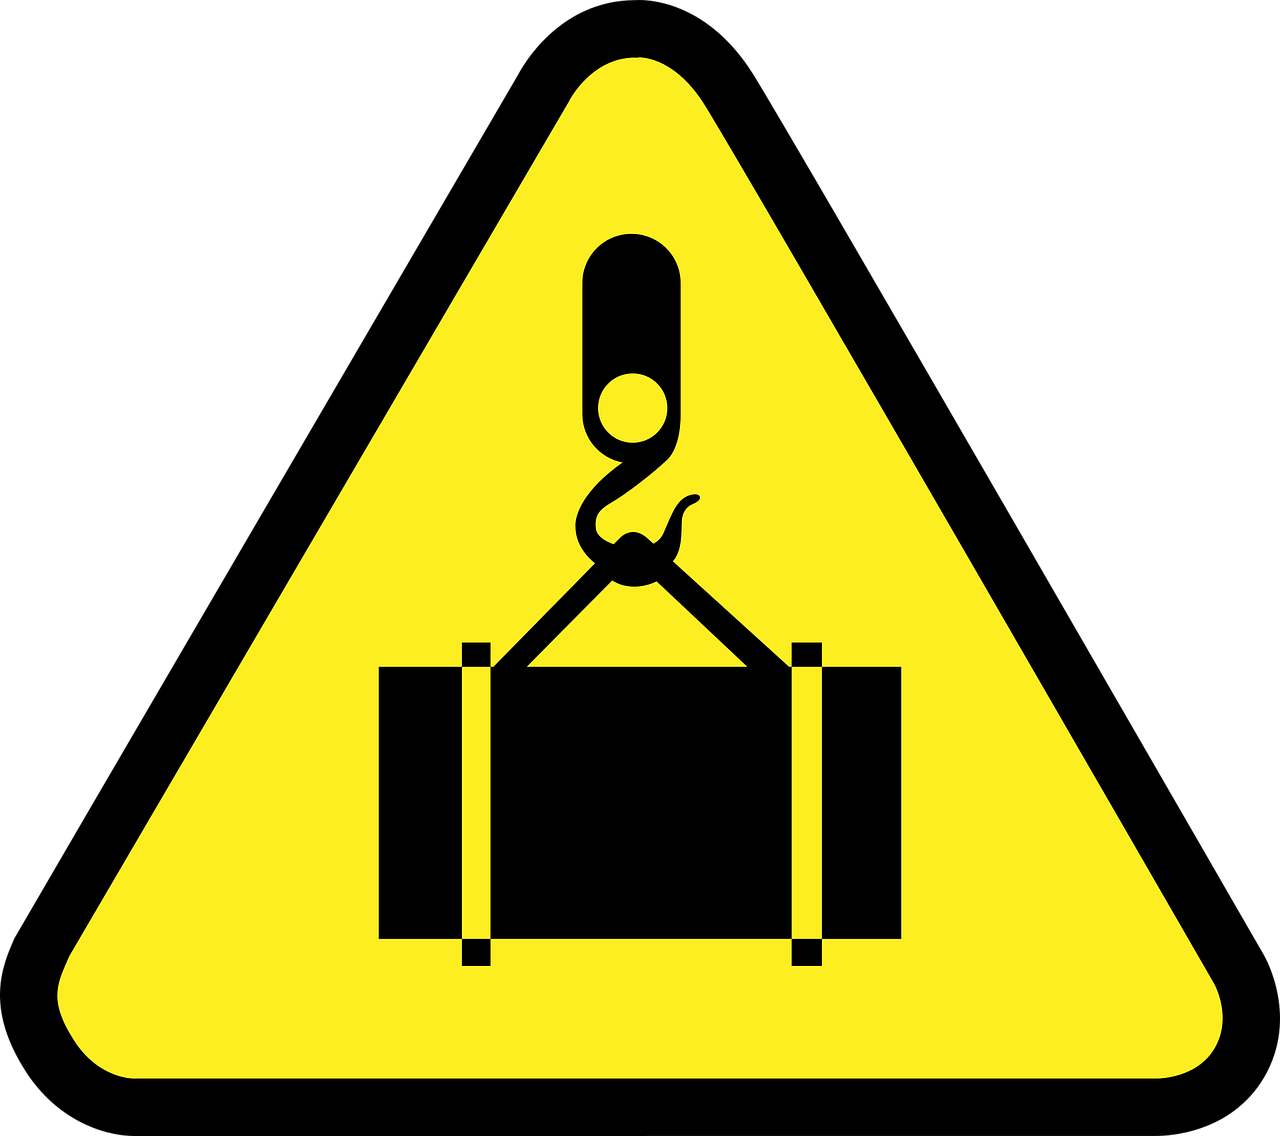 A yellow warning sign with a crane lifting a suitcase.